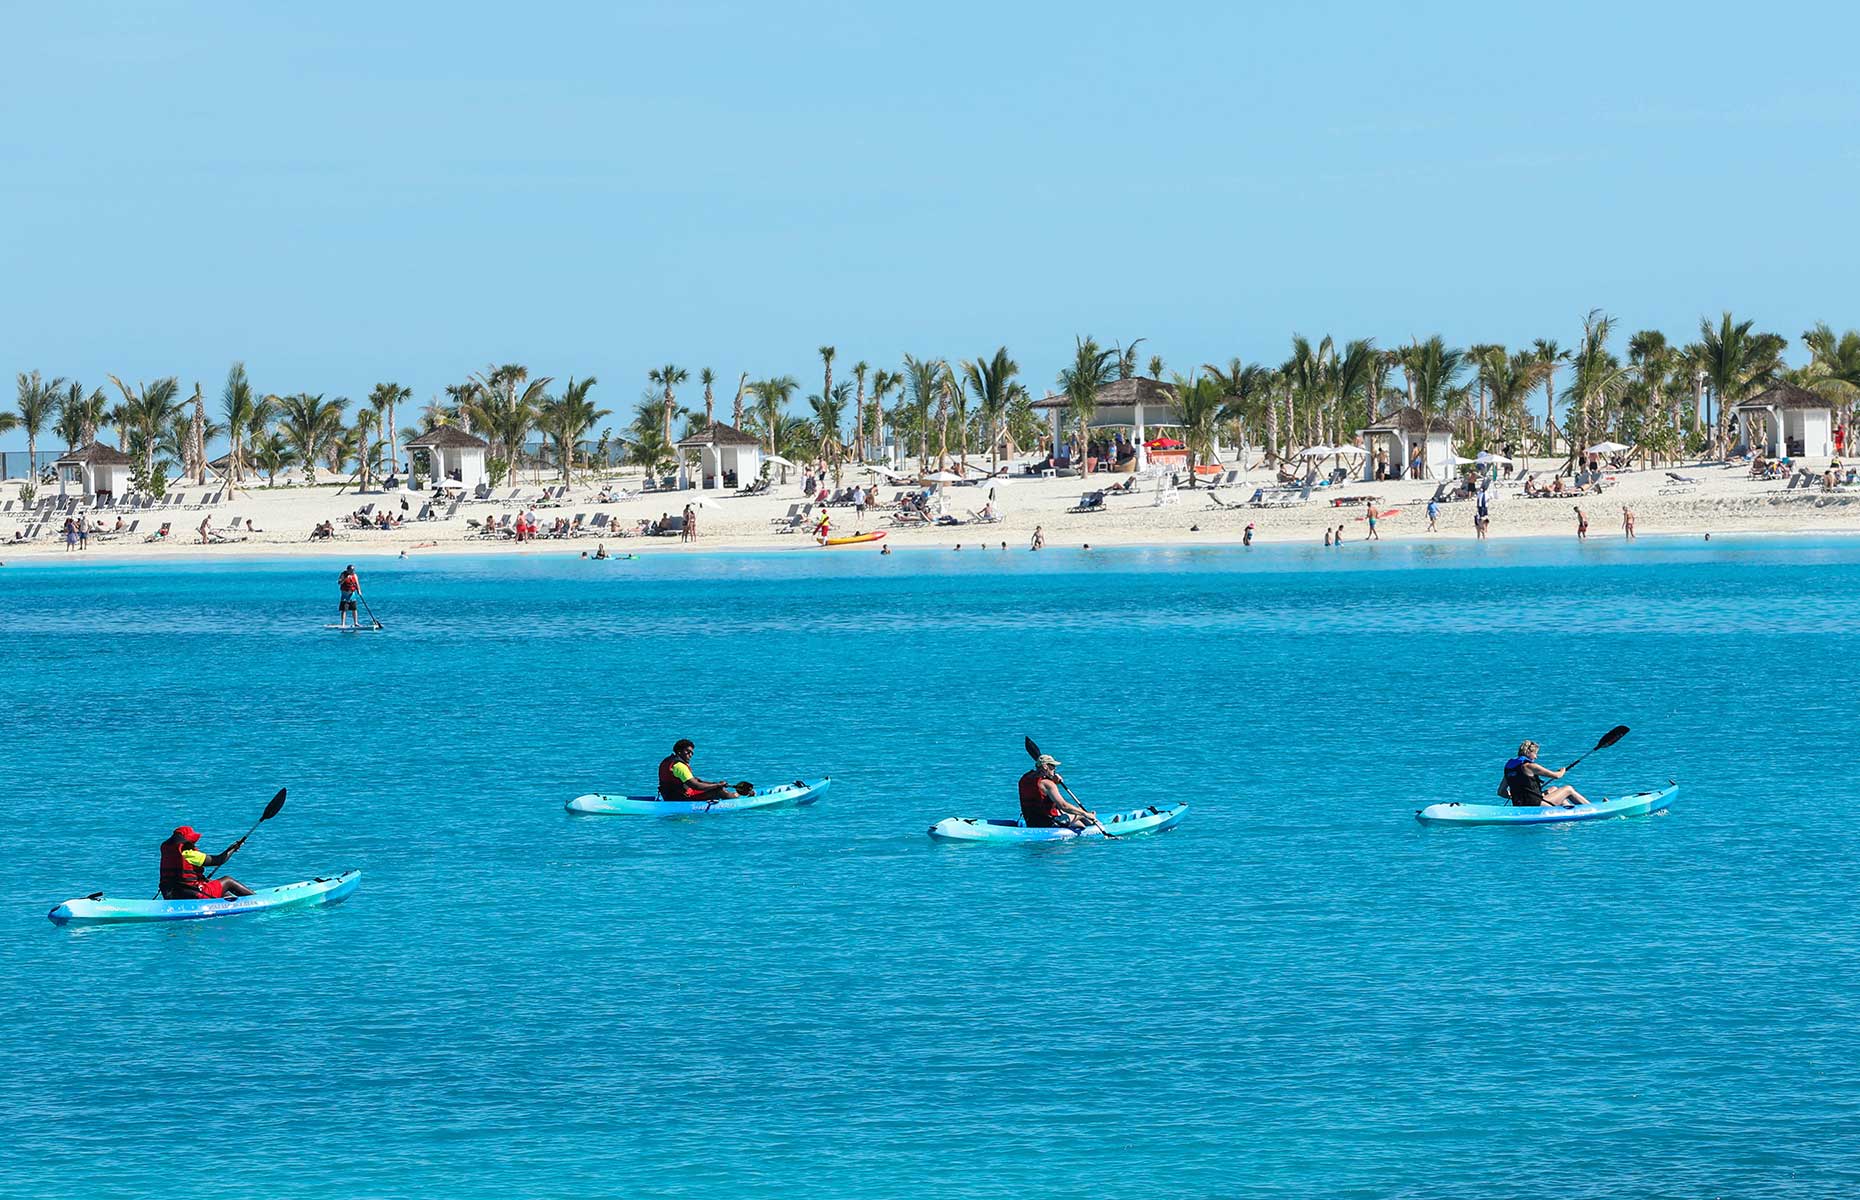 Take a kayak tour with MSC Cruises at Ocean Cay (Image: Courtesy of MSC)